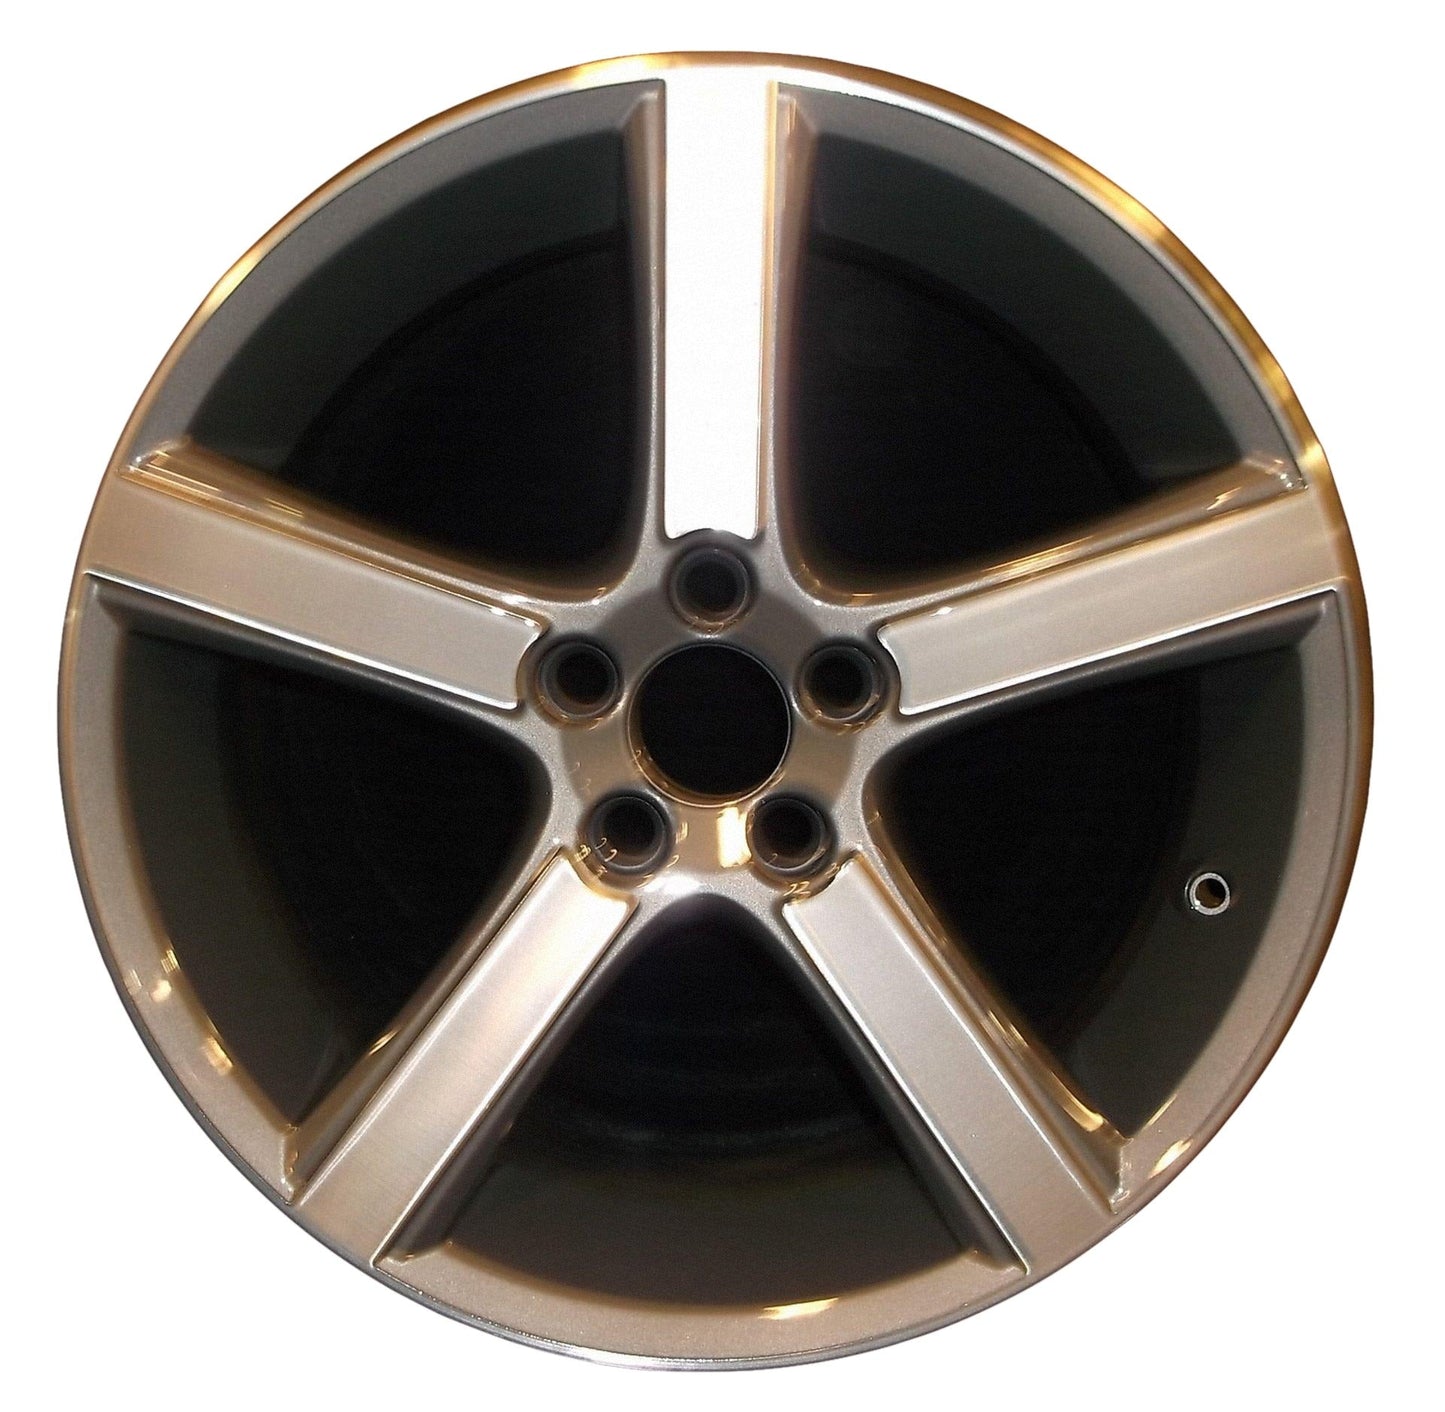 Volvo 30 Series  2009, 2010, 2011, 2012, 2013 Factory OEM Car Wheel Size 18x7.5 Alloy WAO.70339.LC33.MA